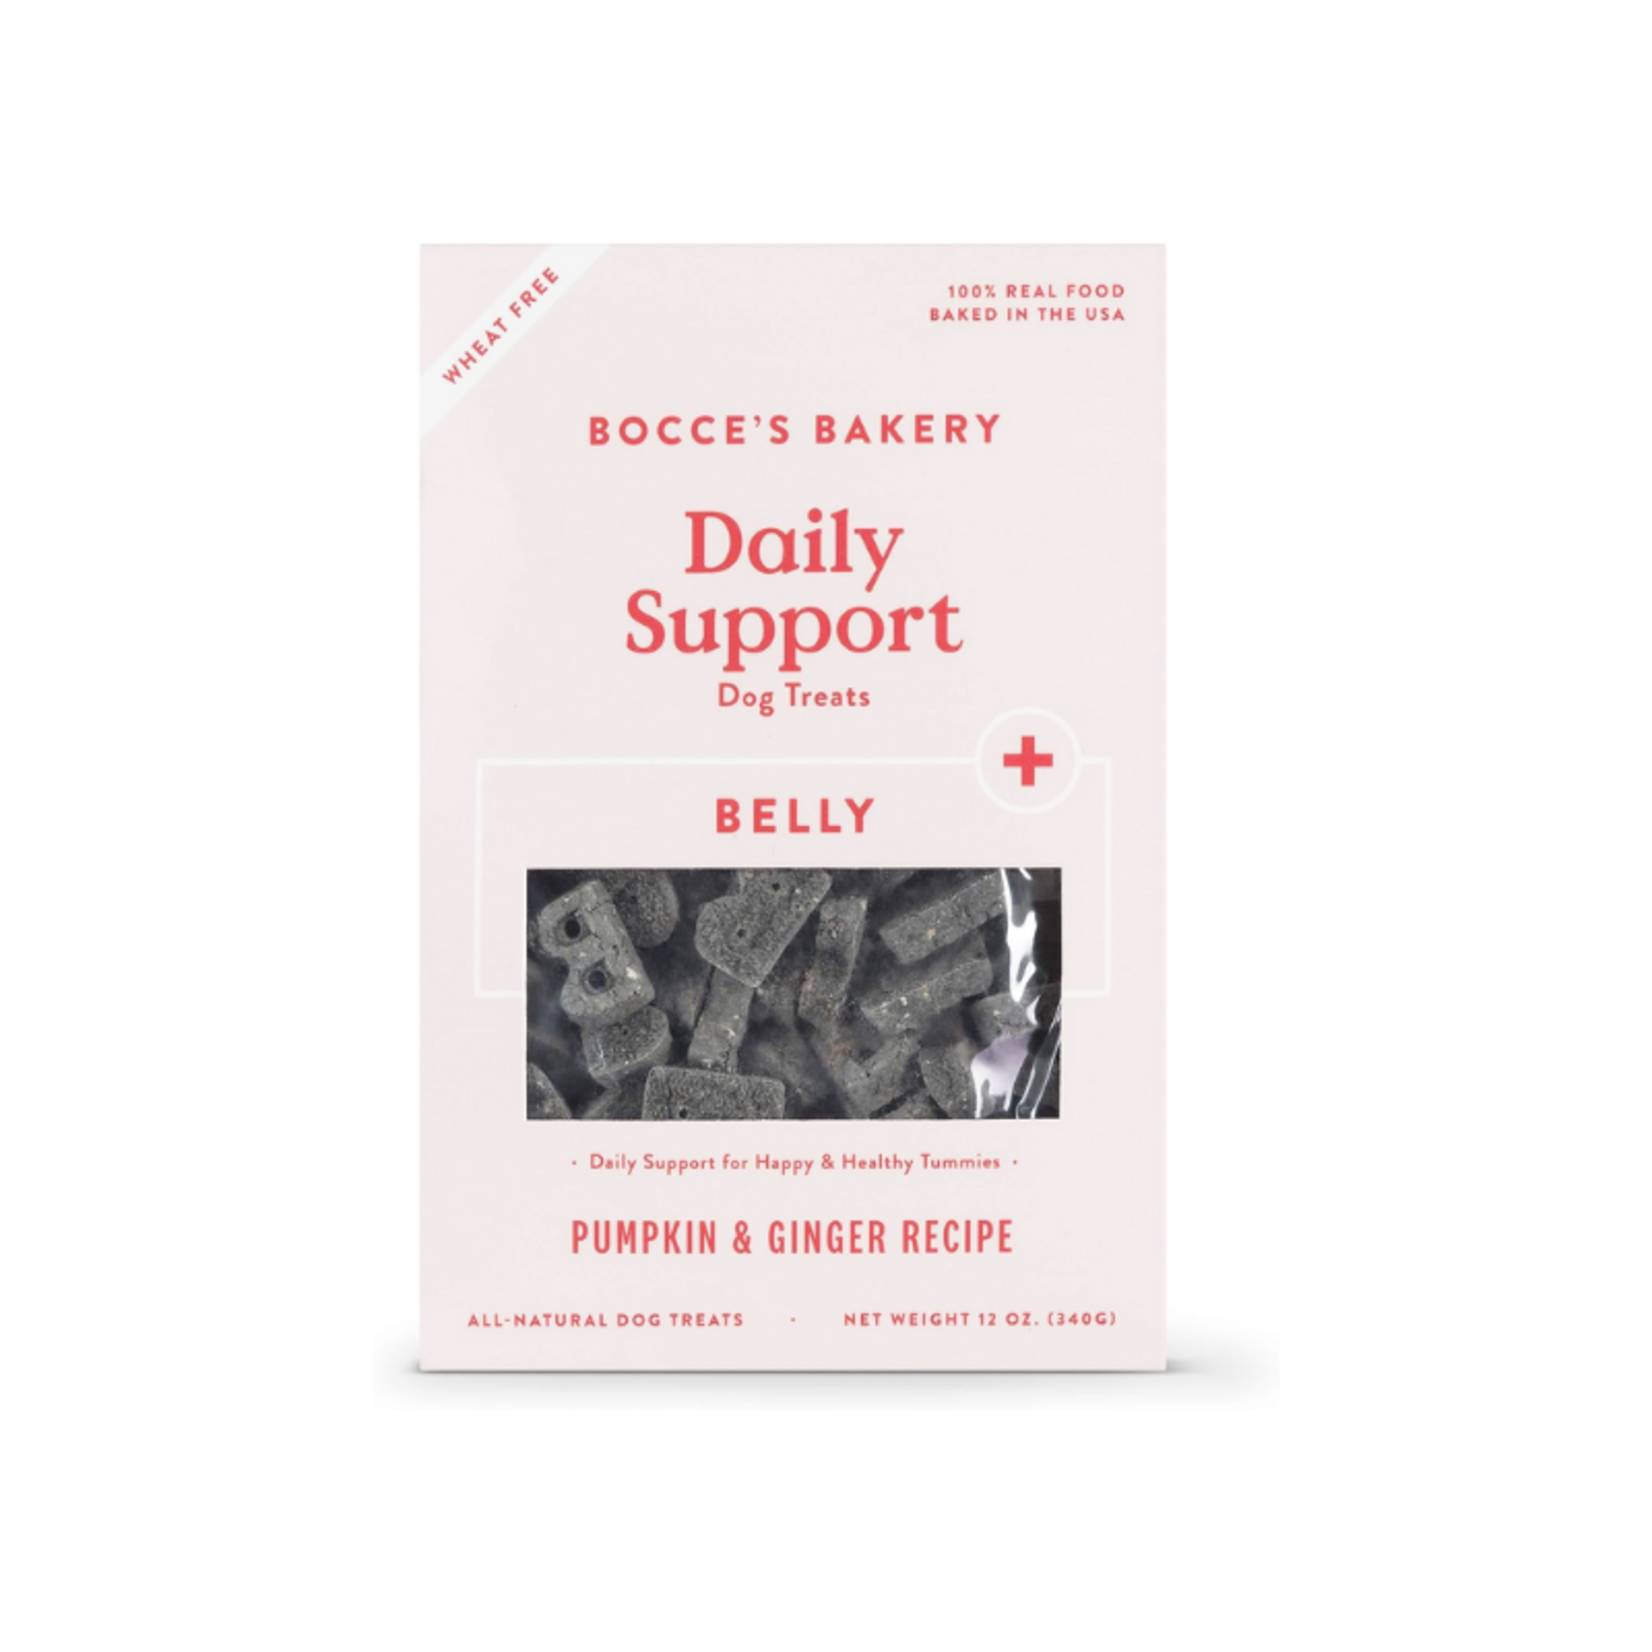 Bocce's Bakery 12 oz. - Pumpkin & Ginger - Belly Daily Support Biscuit - Bocce's Bakery